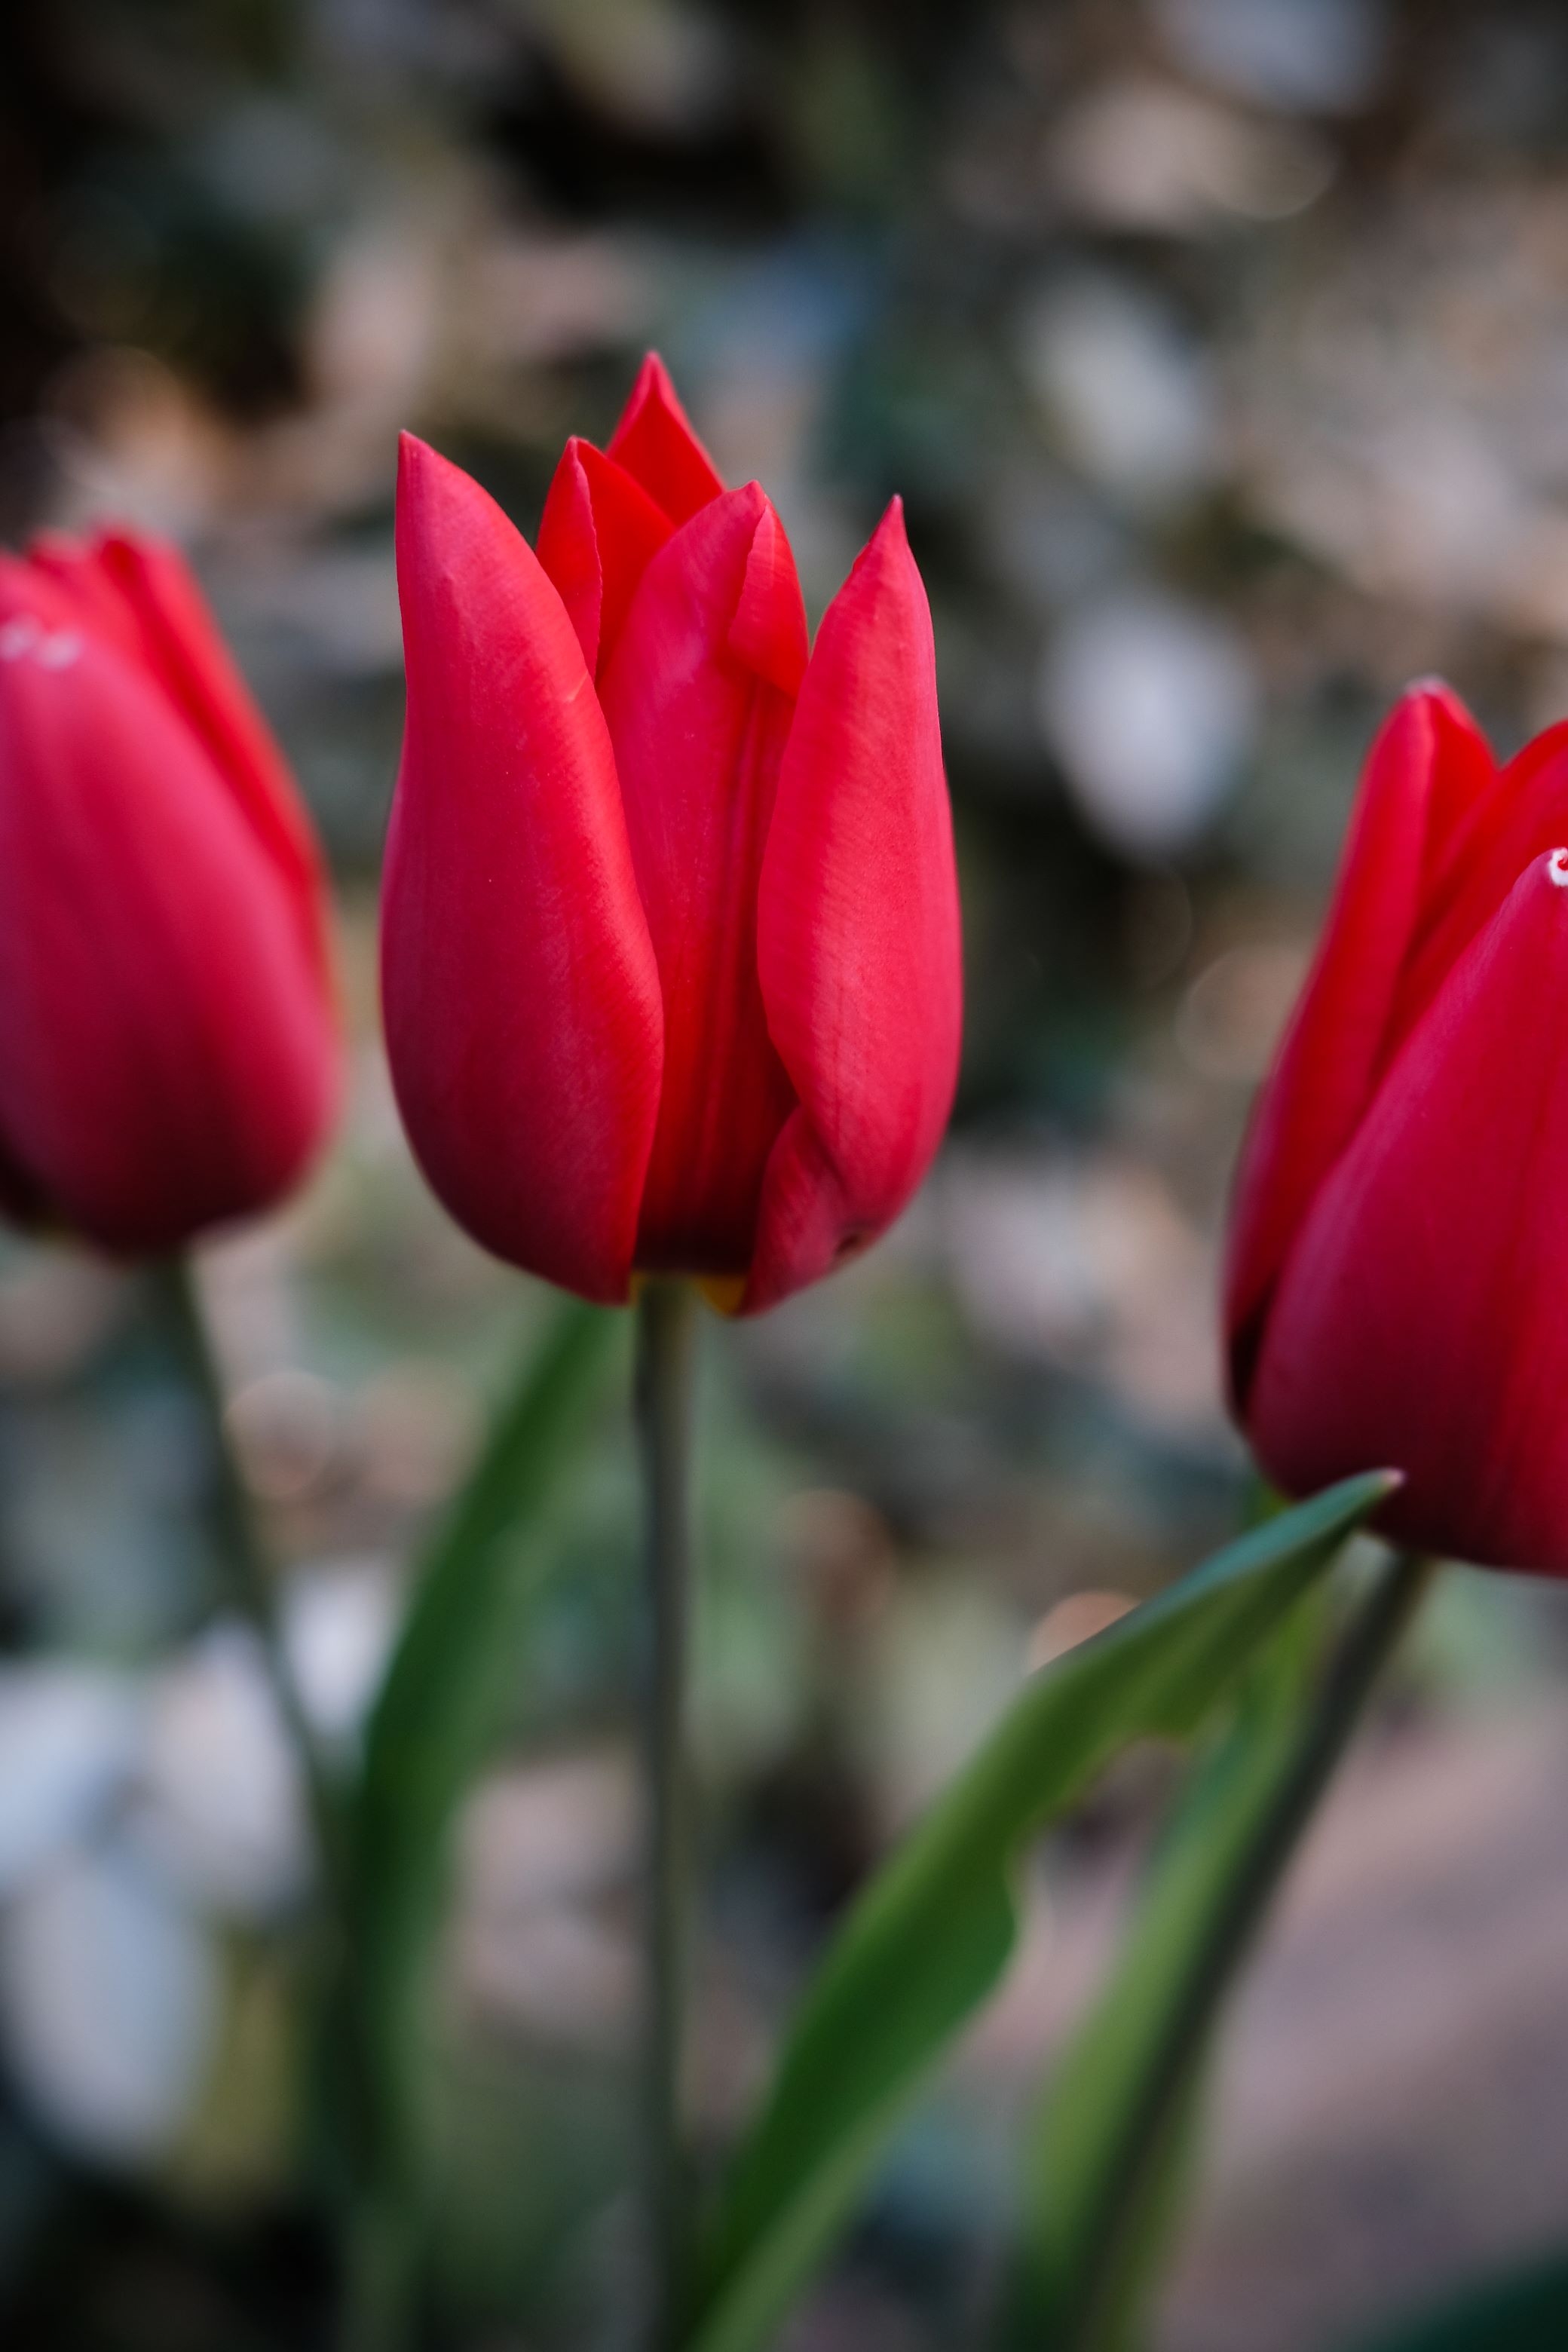 Red tulips close-up.